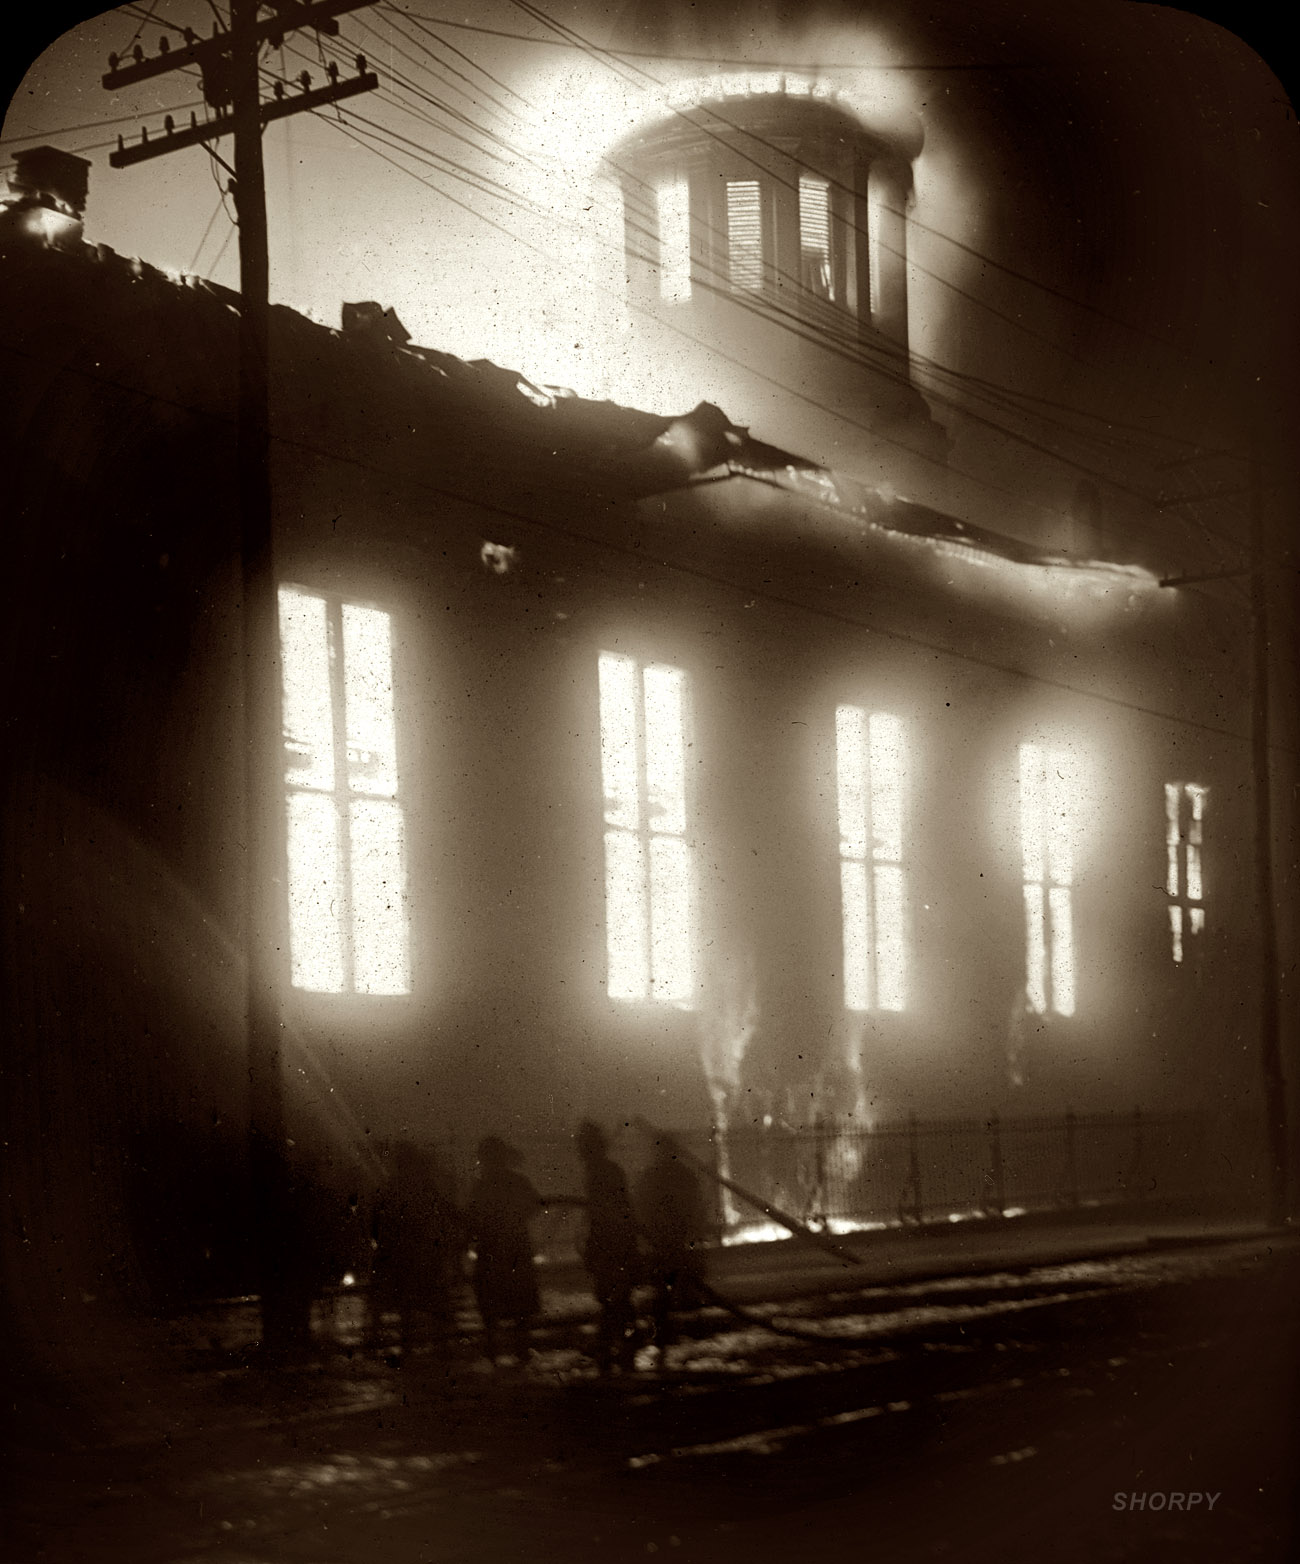 "Baltimore Fire, 1904. Church of the Messiah in flames." Our fourth photo from the Great Fire of 1904. National Photo Company glass negative. View full size.